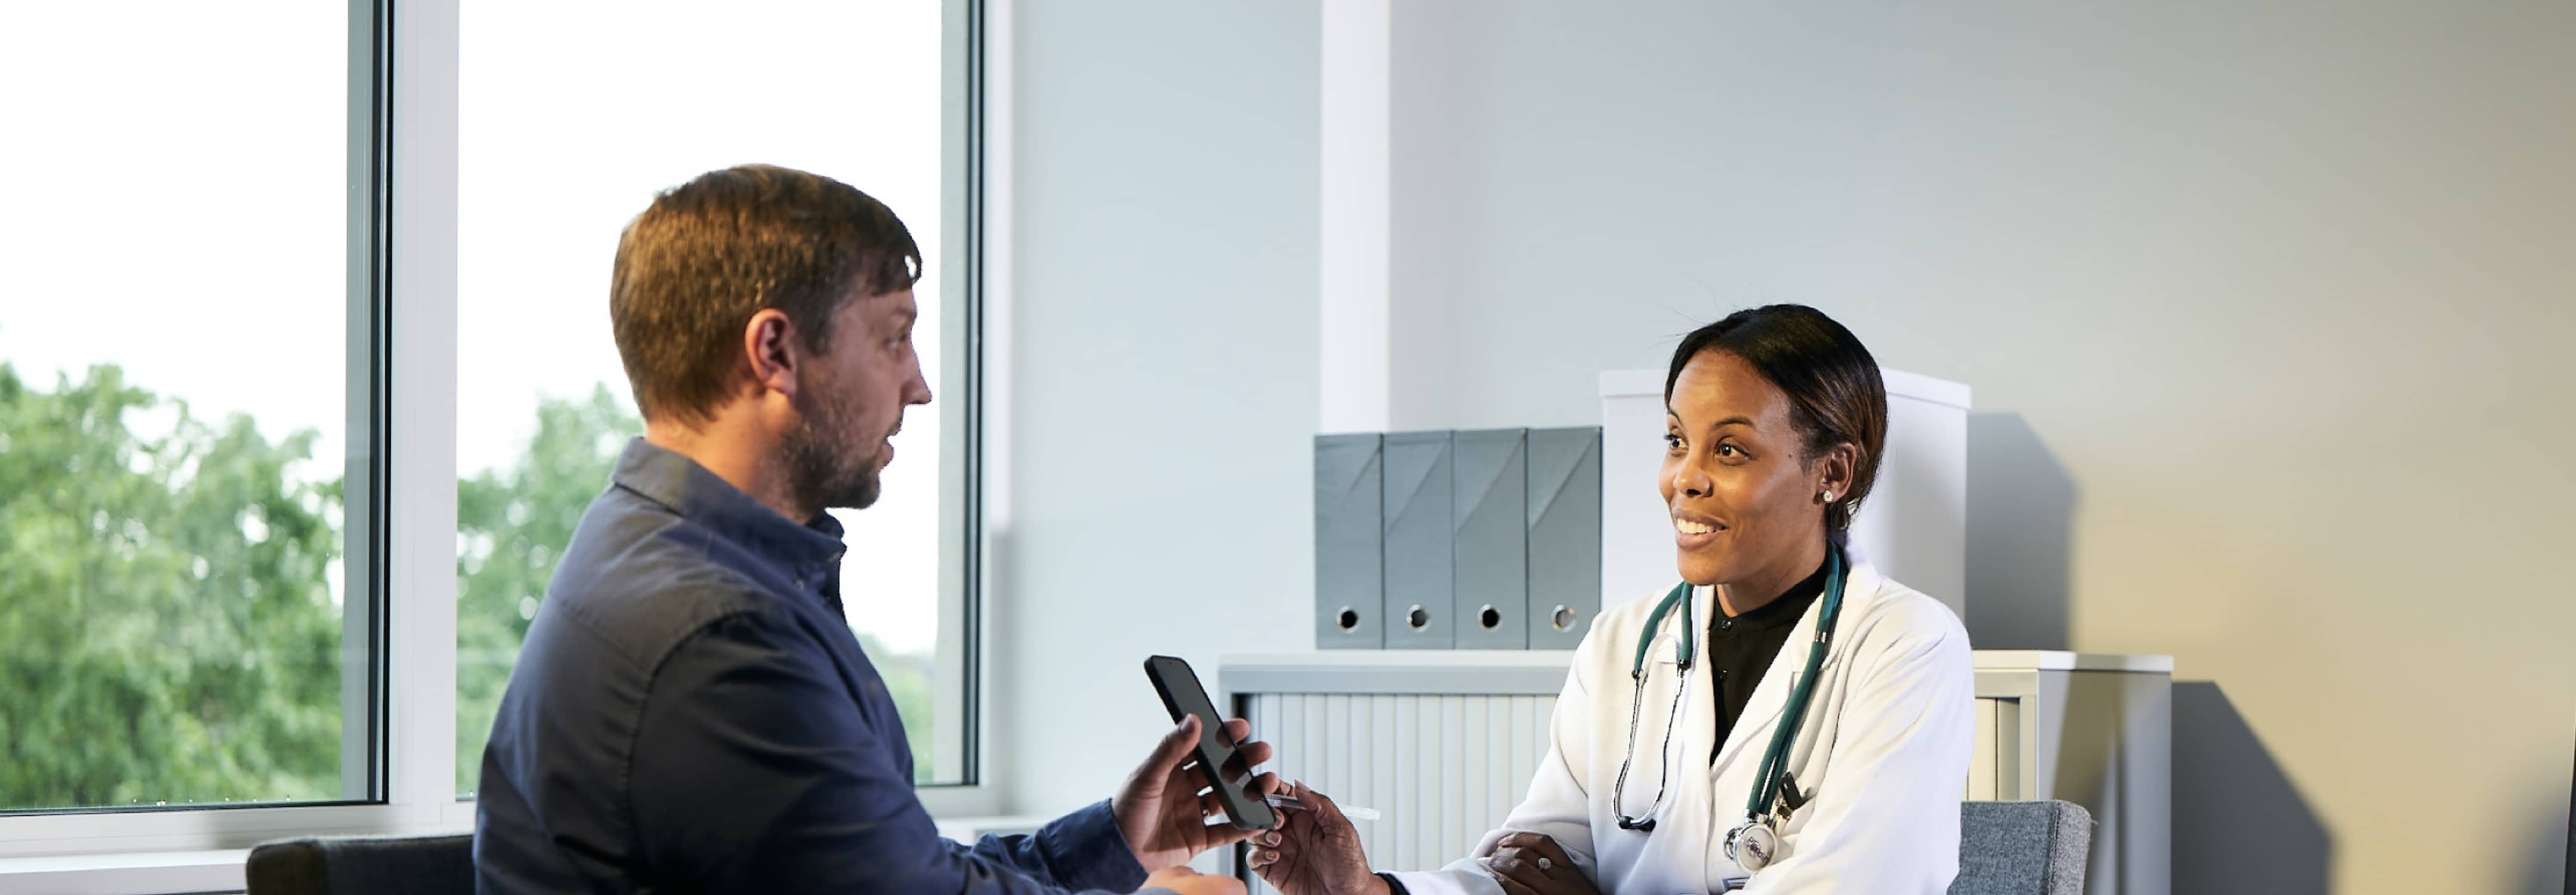 A male patient is in conversation with a female healthcare professional.